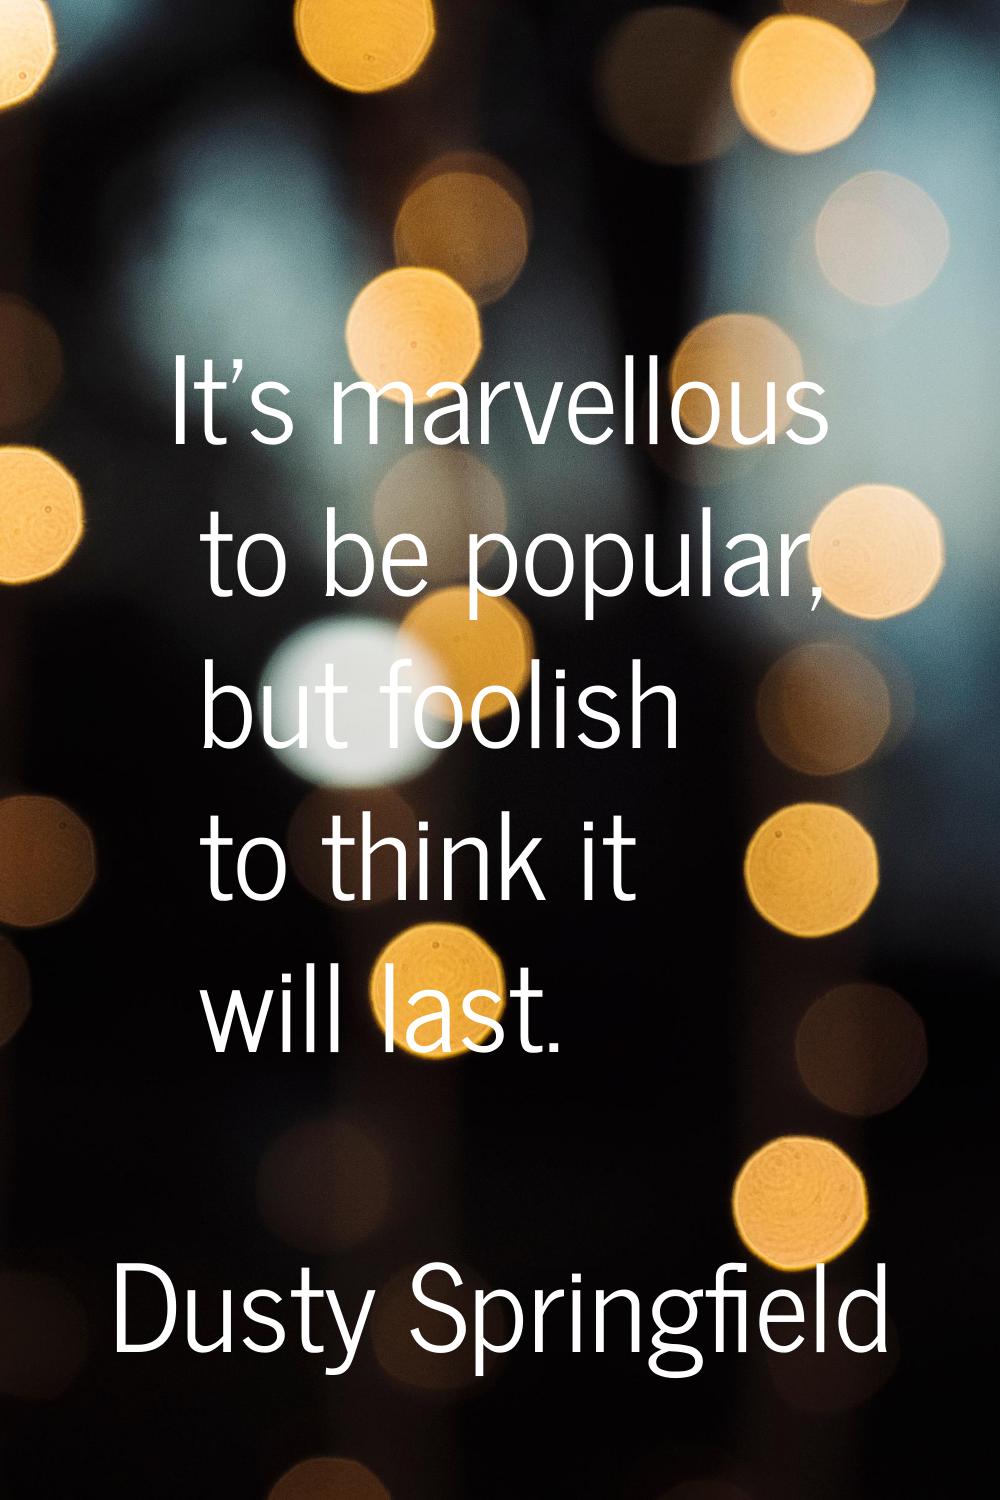 It's marvellous to be popular, but foolish to think it will last.